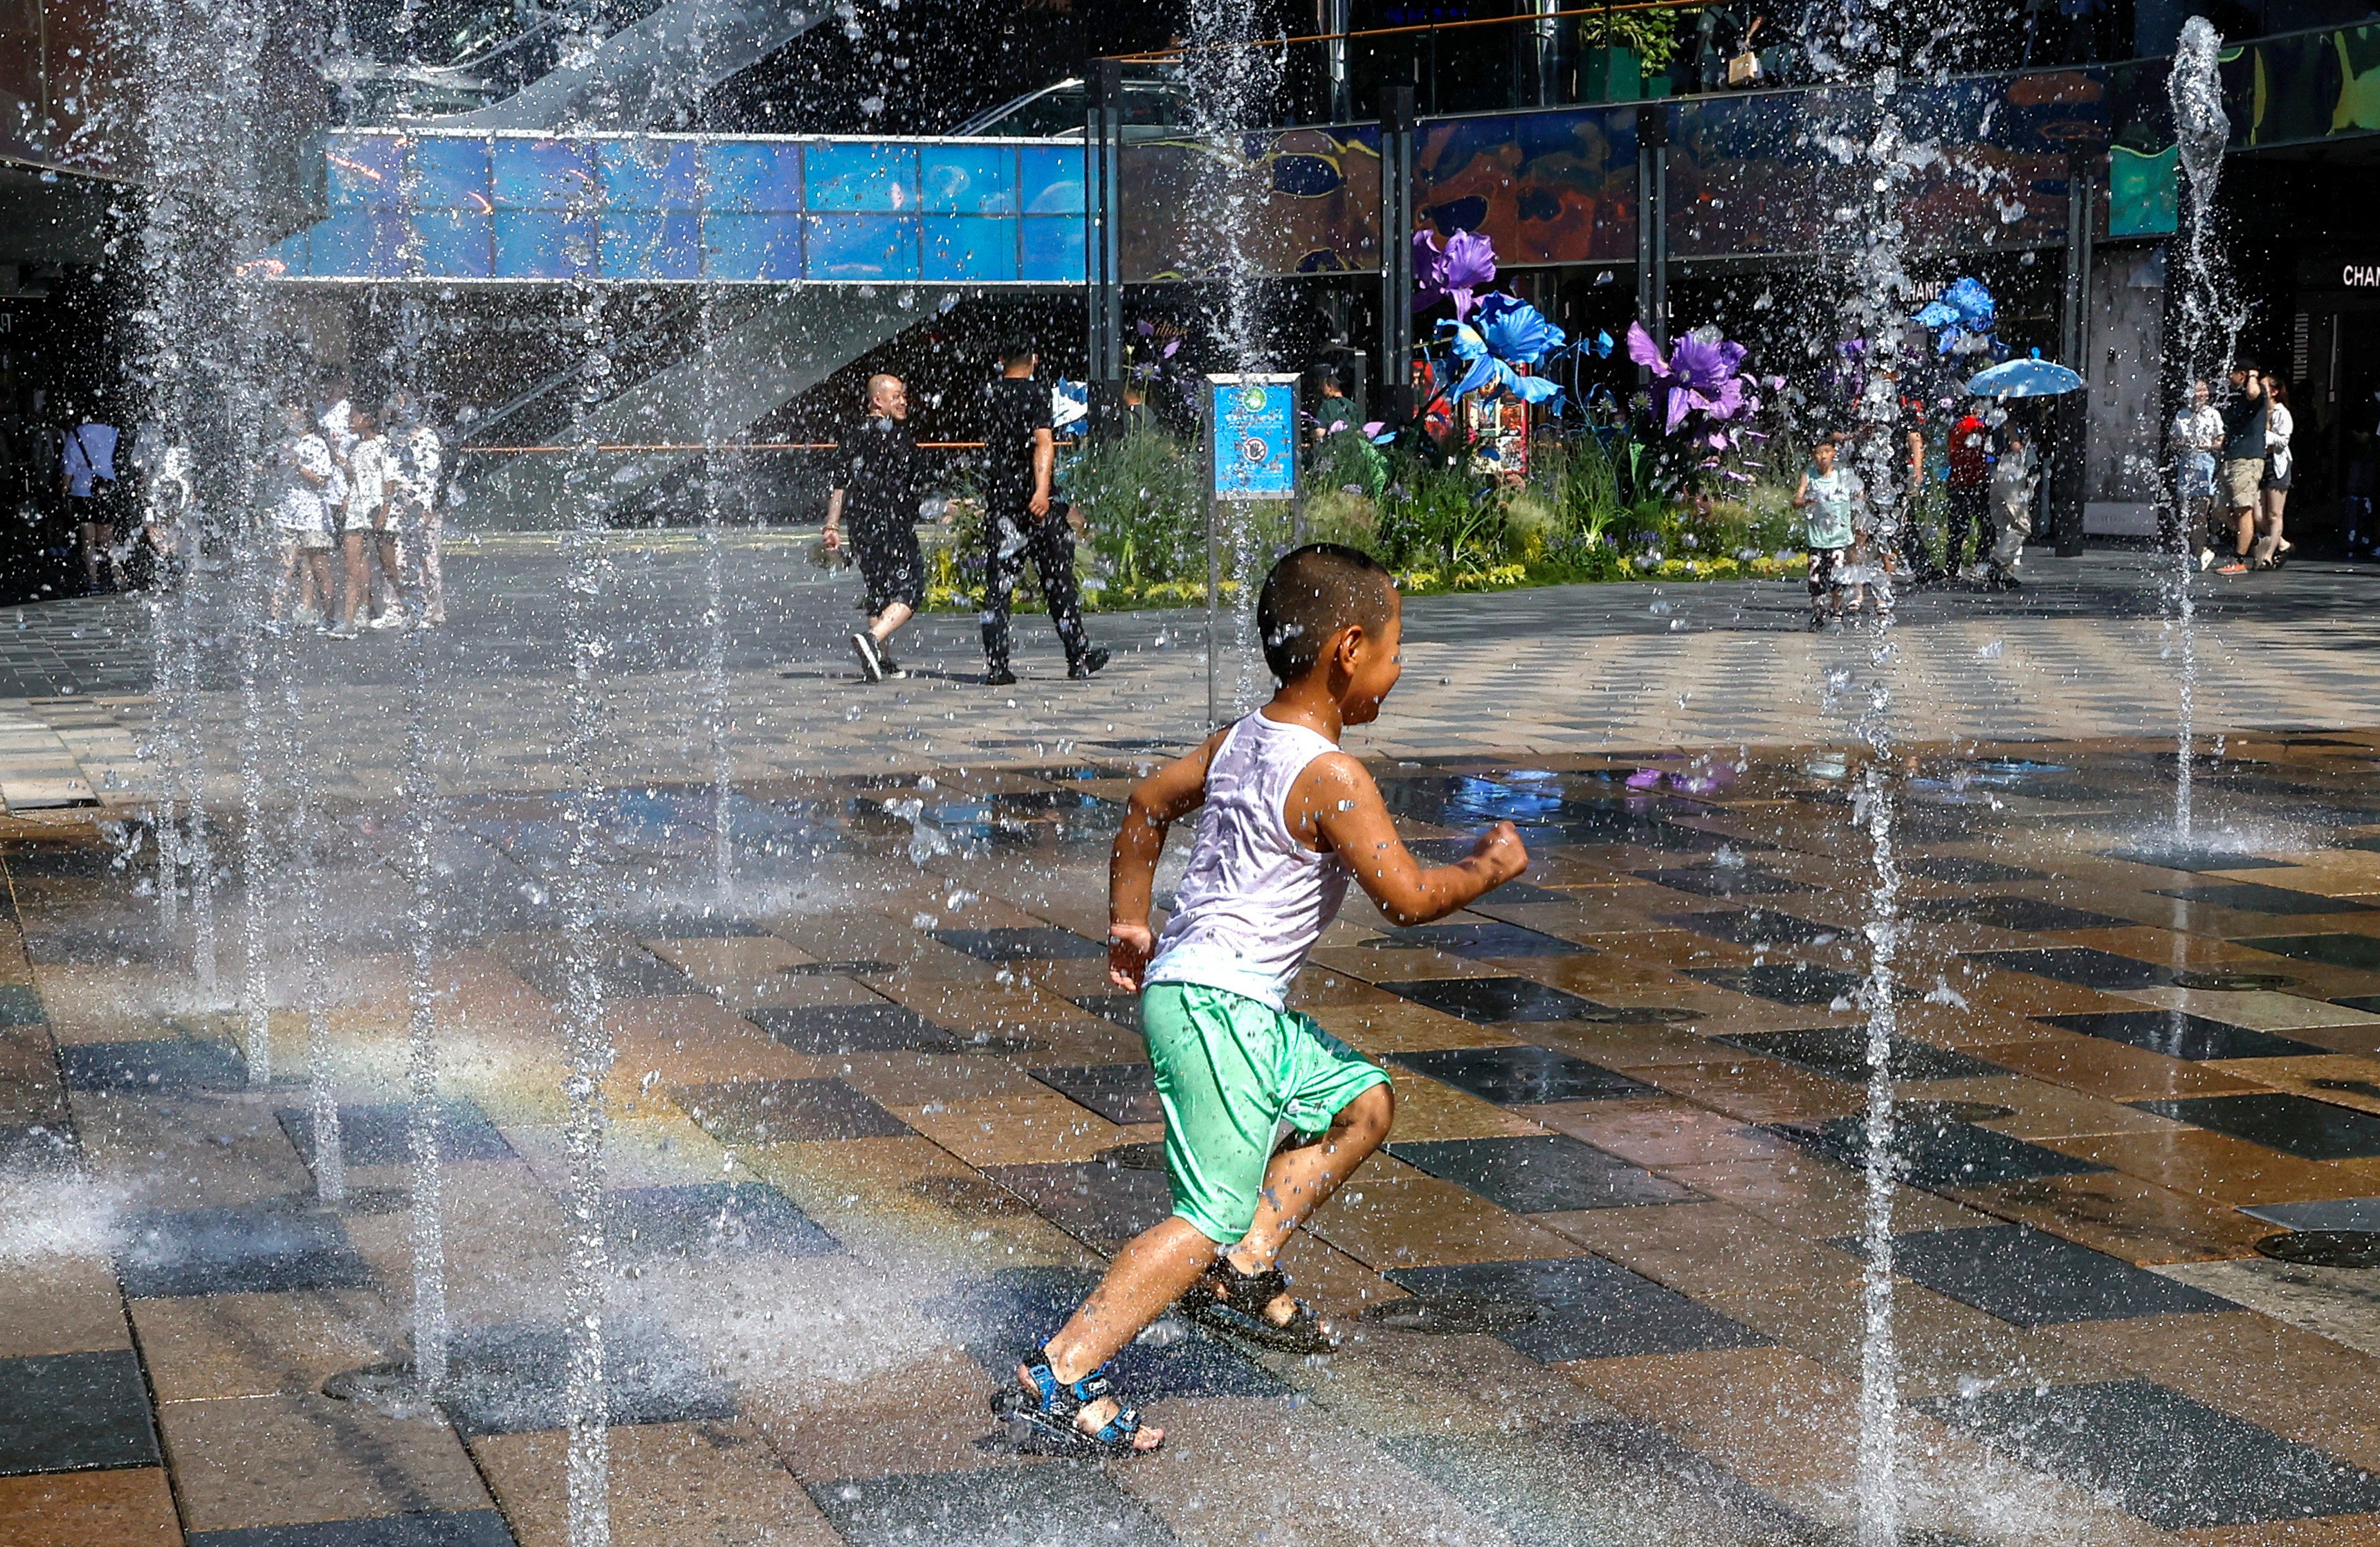 A child cools down in a fountain during last year’s heatwave in Beijing. Photo: Reuters